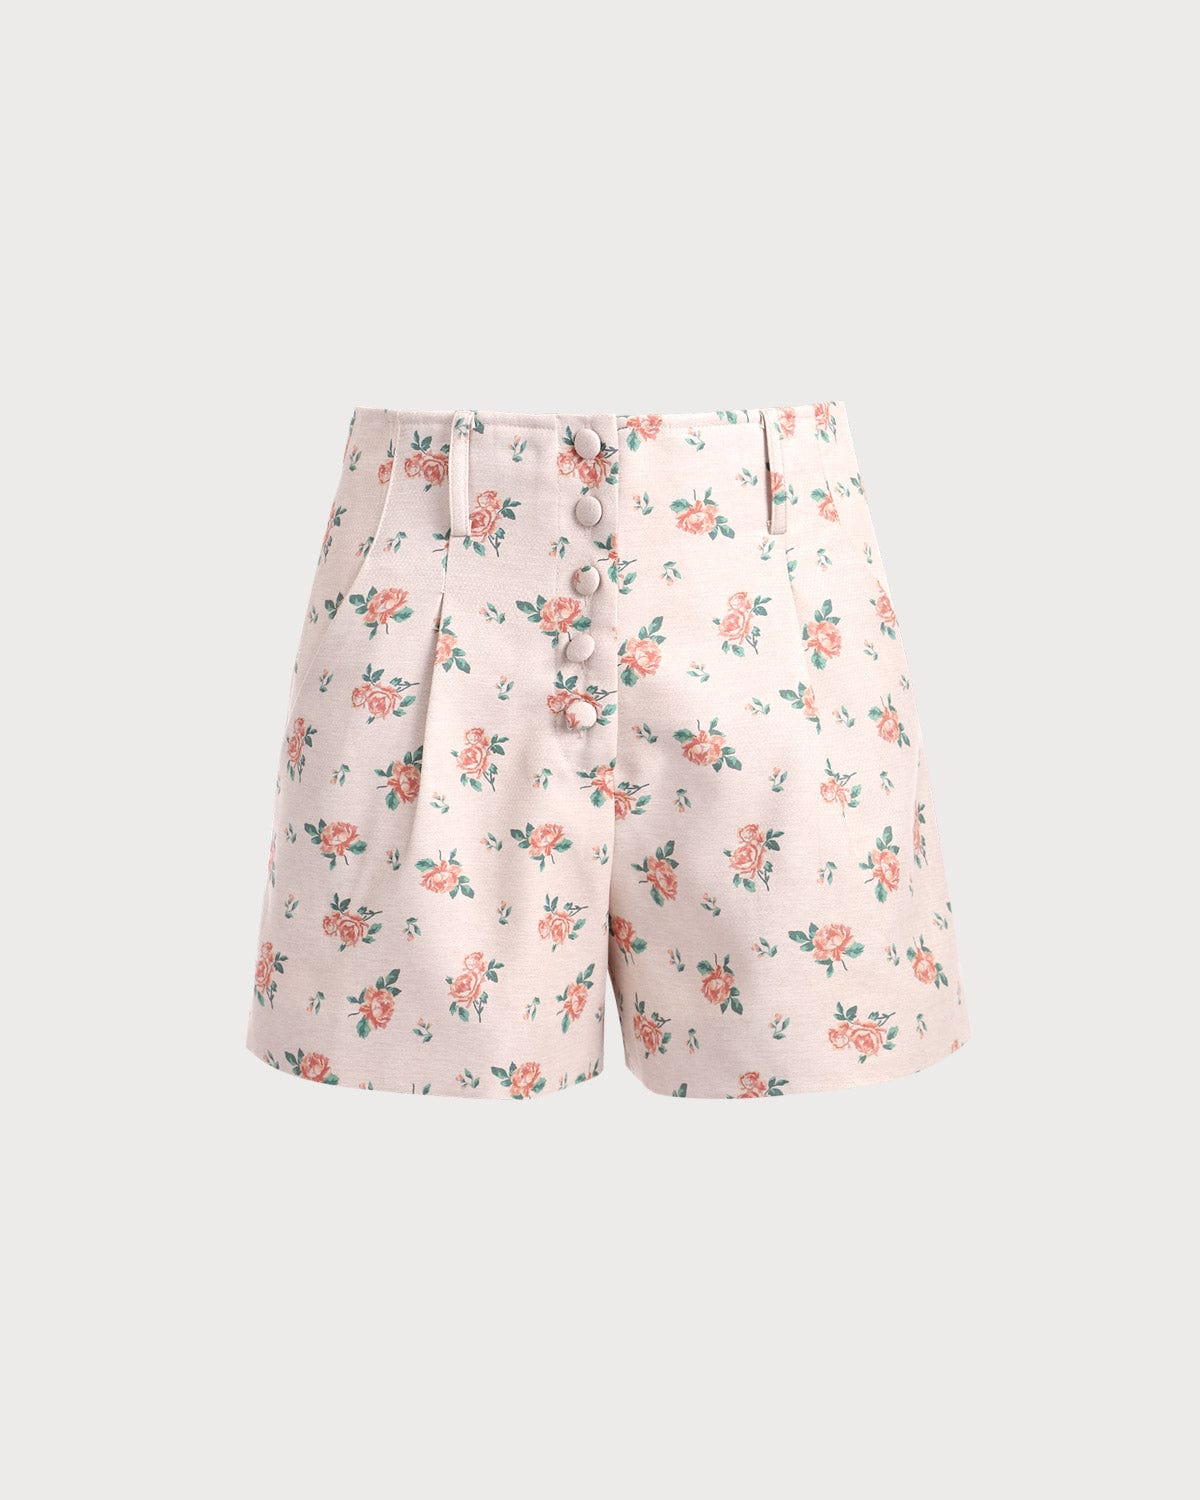 The High Waisted Floral Shorts